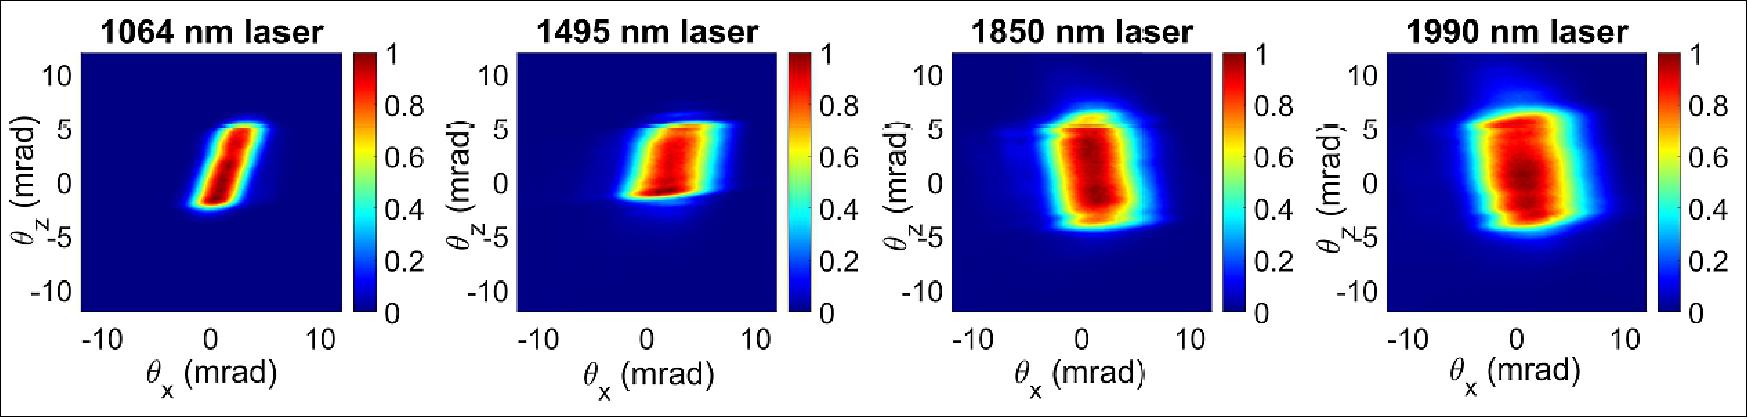 Figure 7: Measured far-field normalized laser divergence profiles. The color scales report the lasers’ radiances normalized to unity. θx and θz are respectively the rotation angles around axis X and Z, and the XZ plane is coplanar with the optical window of the laser package. The lasers’ co-alignment is thus “included” in the data depicted in this figure. These data come from DILAS Inc., which has designed the lasers. The coordinate (0,0) mrad corresponds to the centroid of the average of the divergence beam profiles depicted in Figure 10(b). The difference between the laser divergence profiles leads to small differences in the footprint on the lunar surface for each wavelength, but this has minimal importance, since LF’s goal is to measure the average water ice concentration over distances up to 10 km long (image credit: LF collaboration)